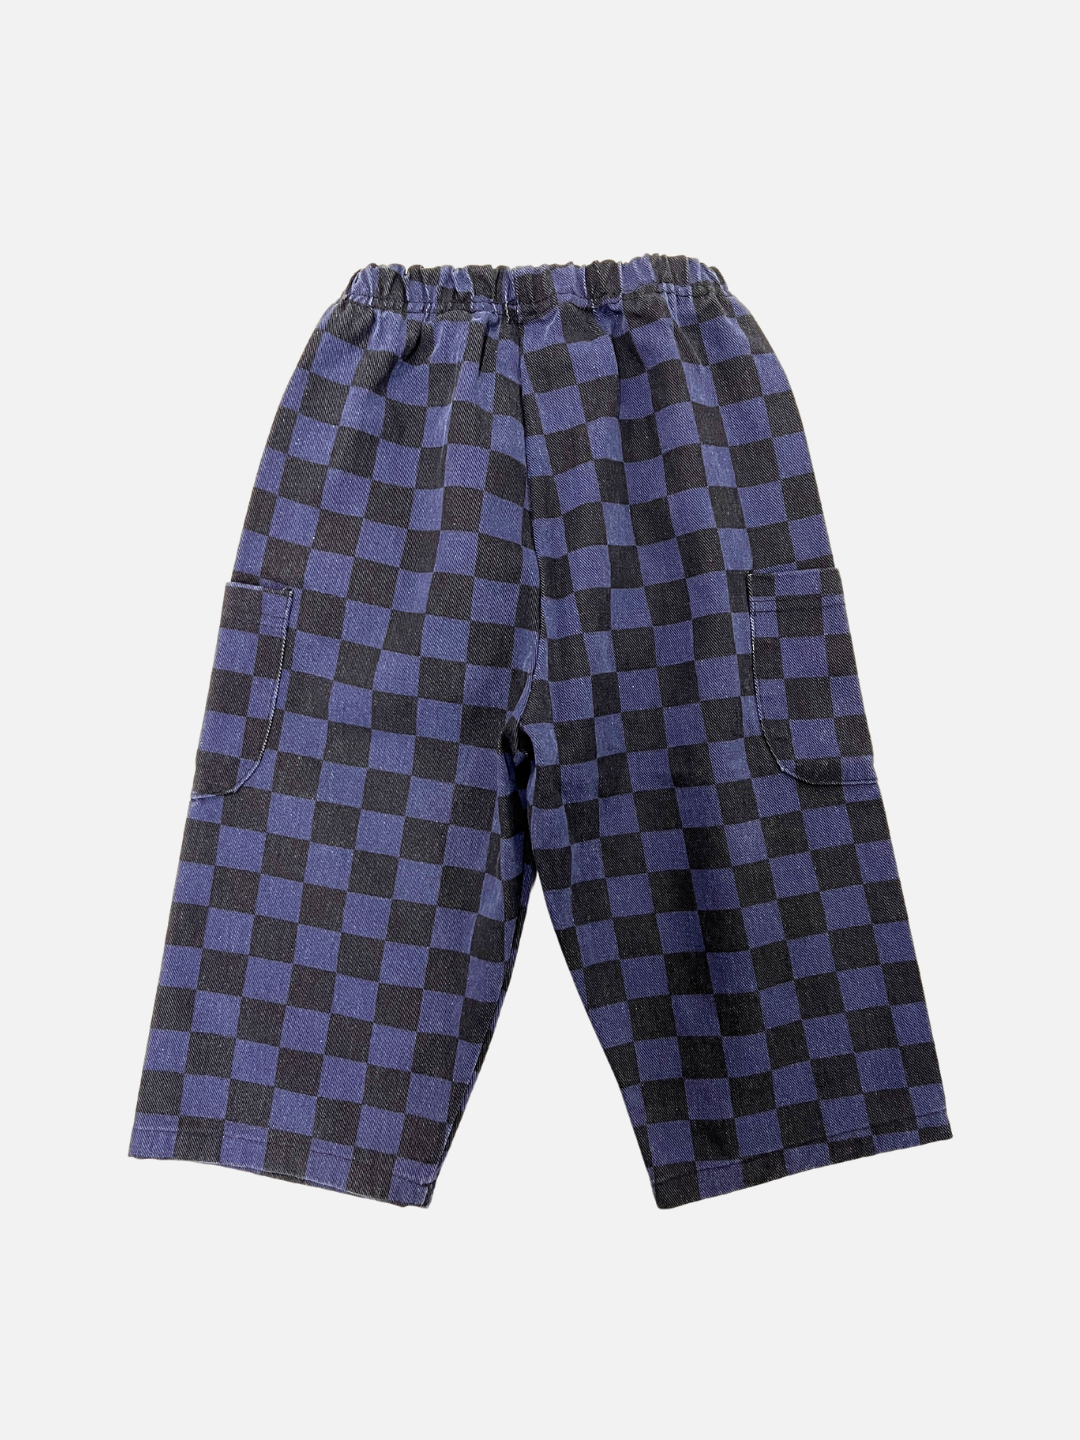 Back view of kids unisex baggy pants in a navy and black checkerboard pattern.